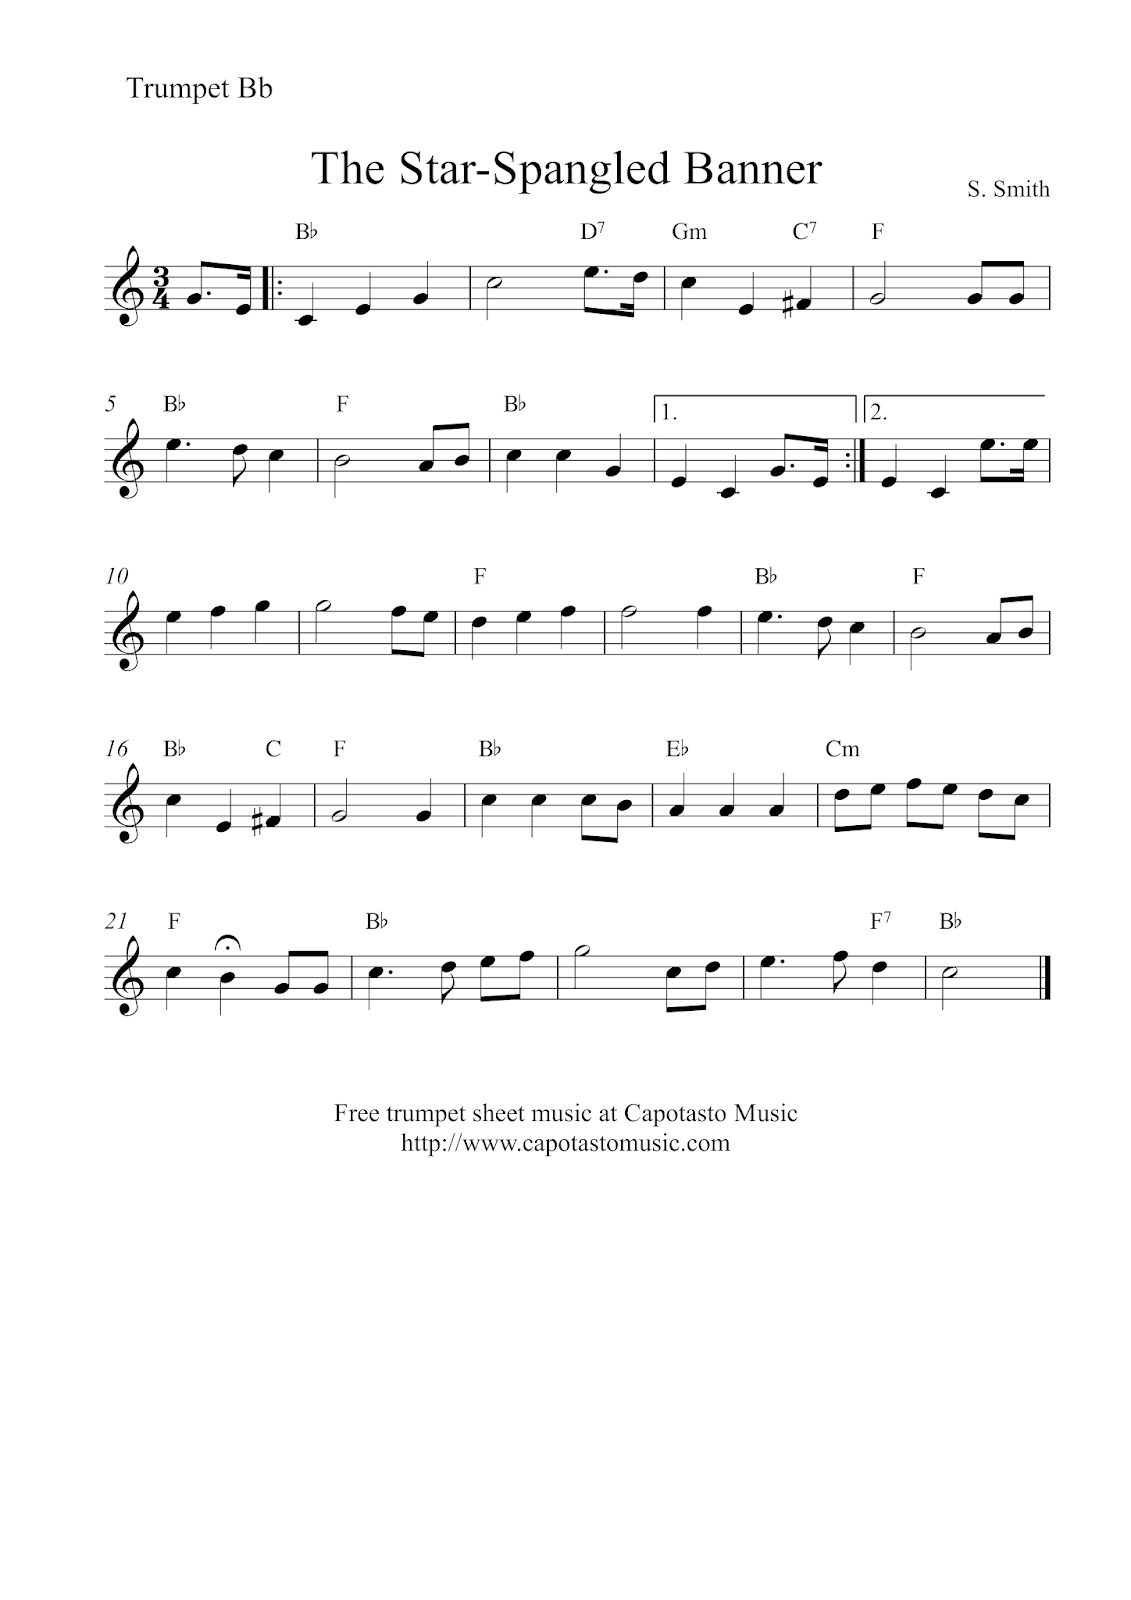 Free Trumpet Sheet Music | The Star-Spangled Banner - Free Printable Piano Sheet Music For The Star Spangled Banner